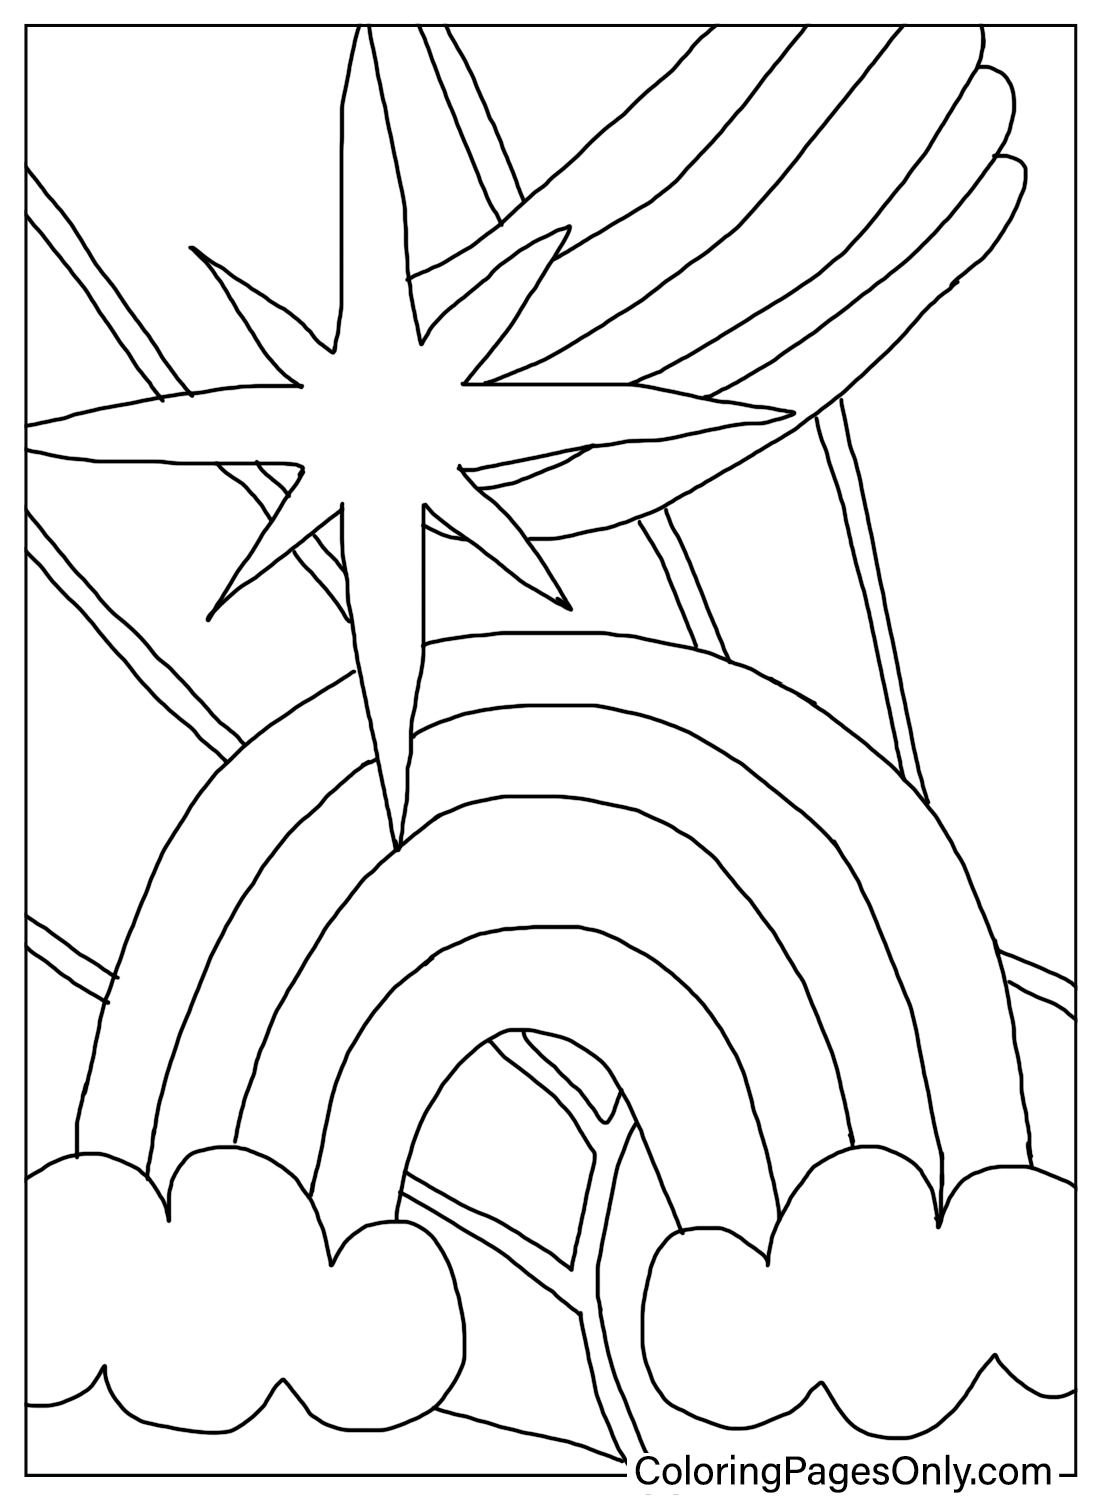 Hippie Mushrooms Coloring Page - Free Printable Coloring Pages